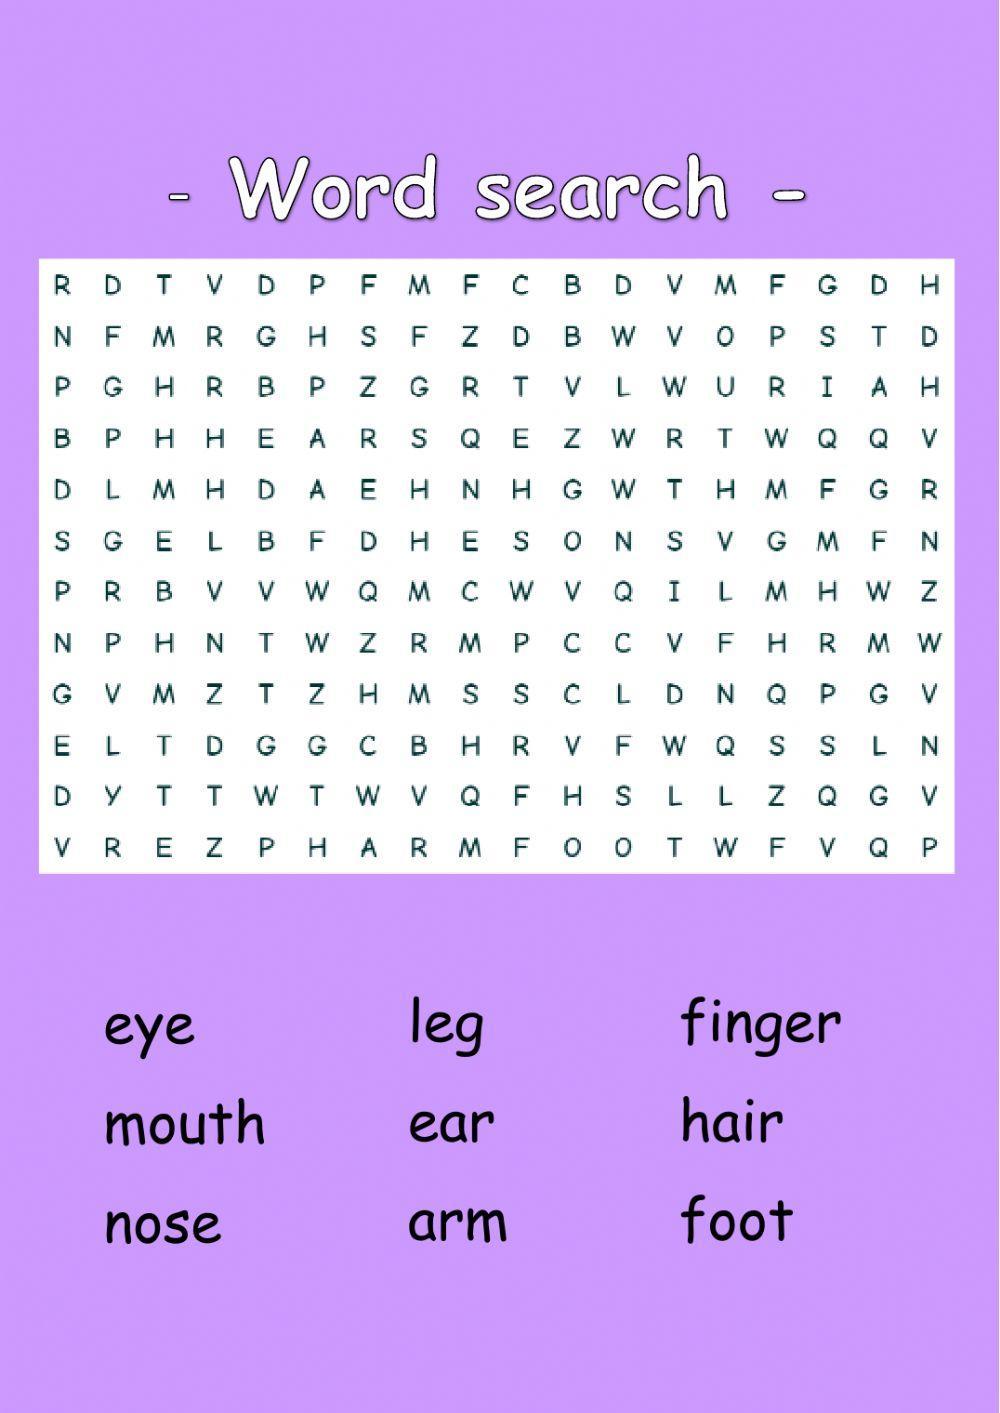 Parts of body - Wordsearch